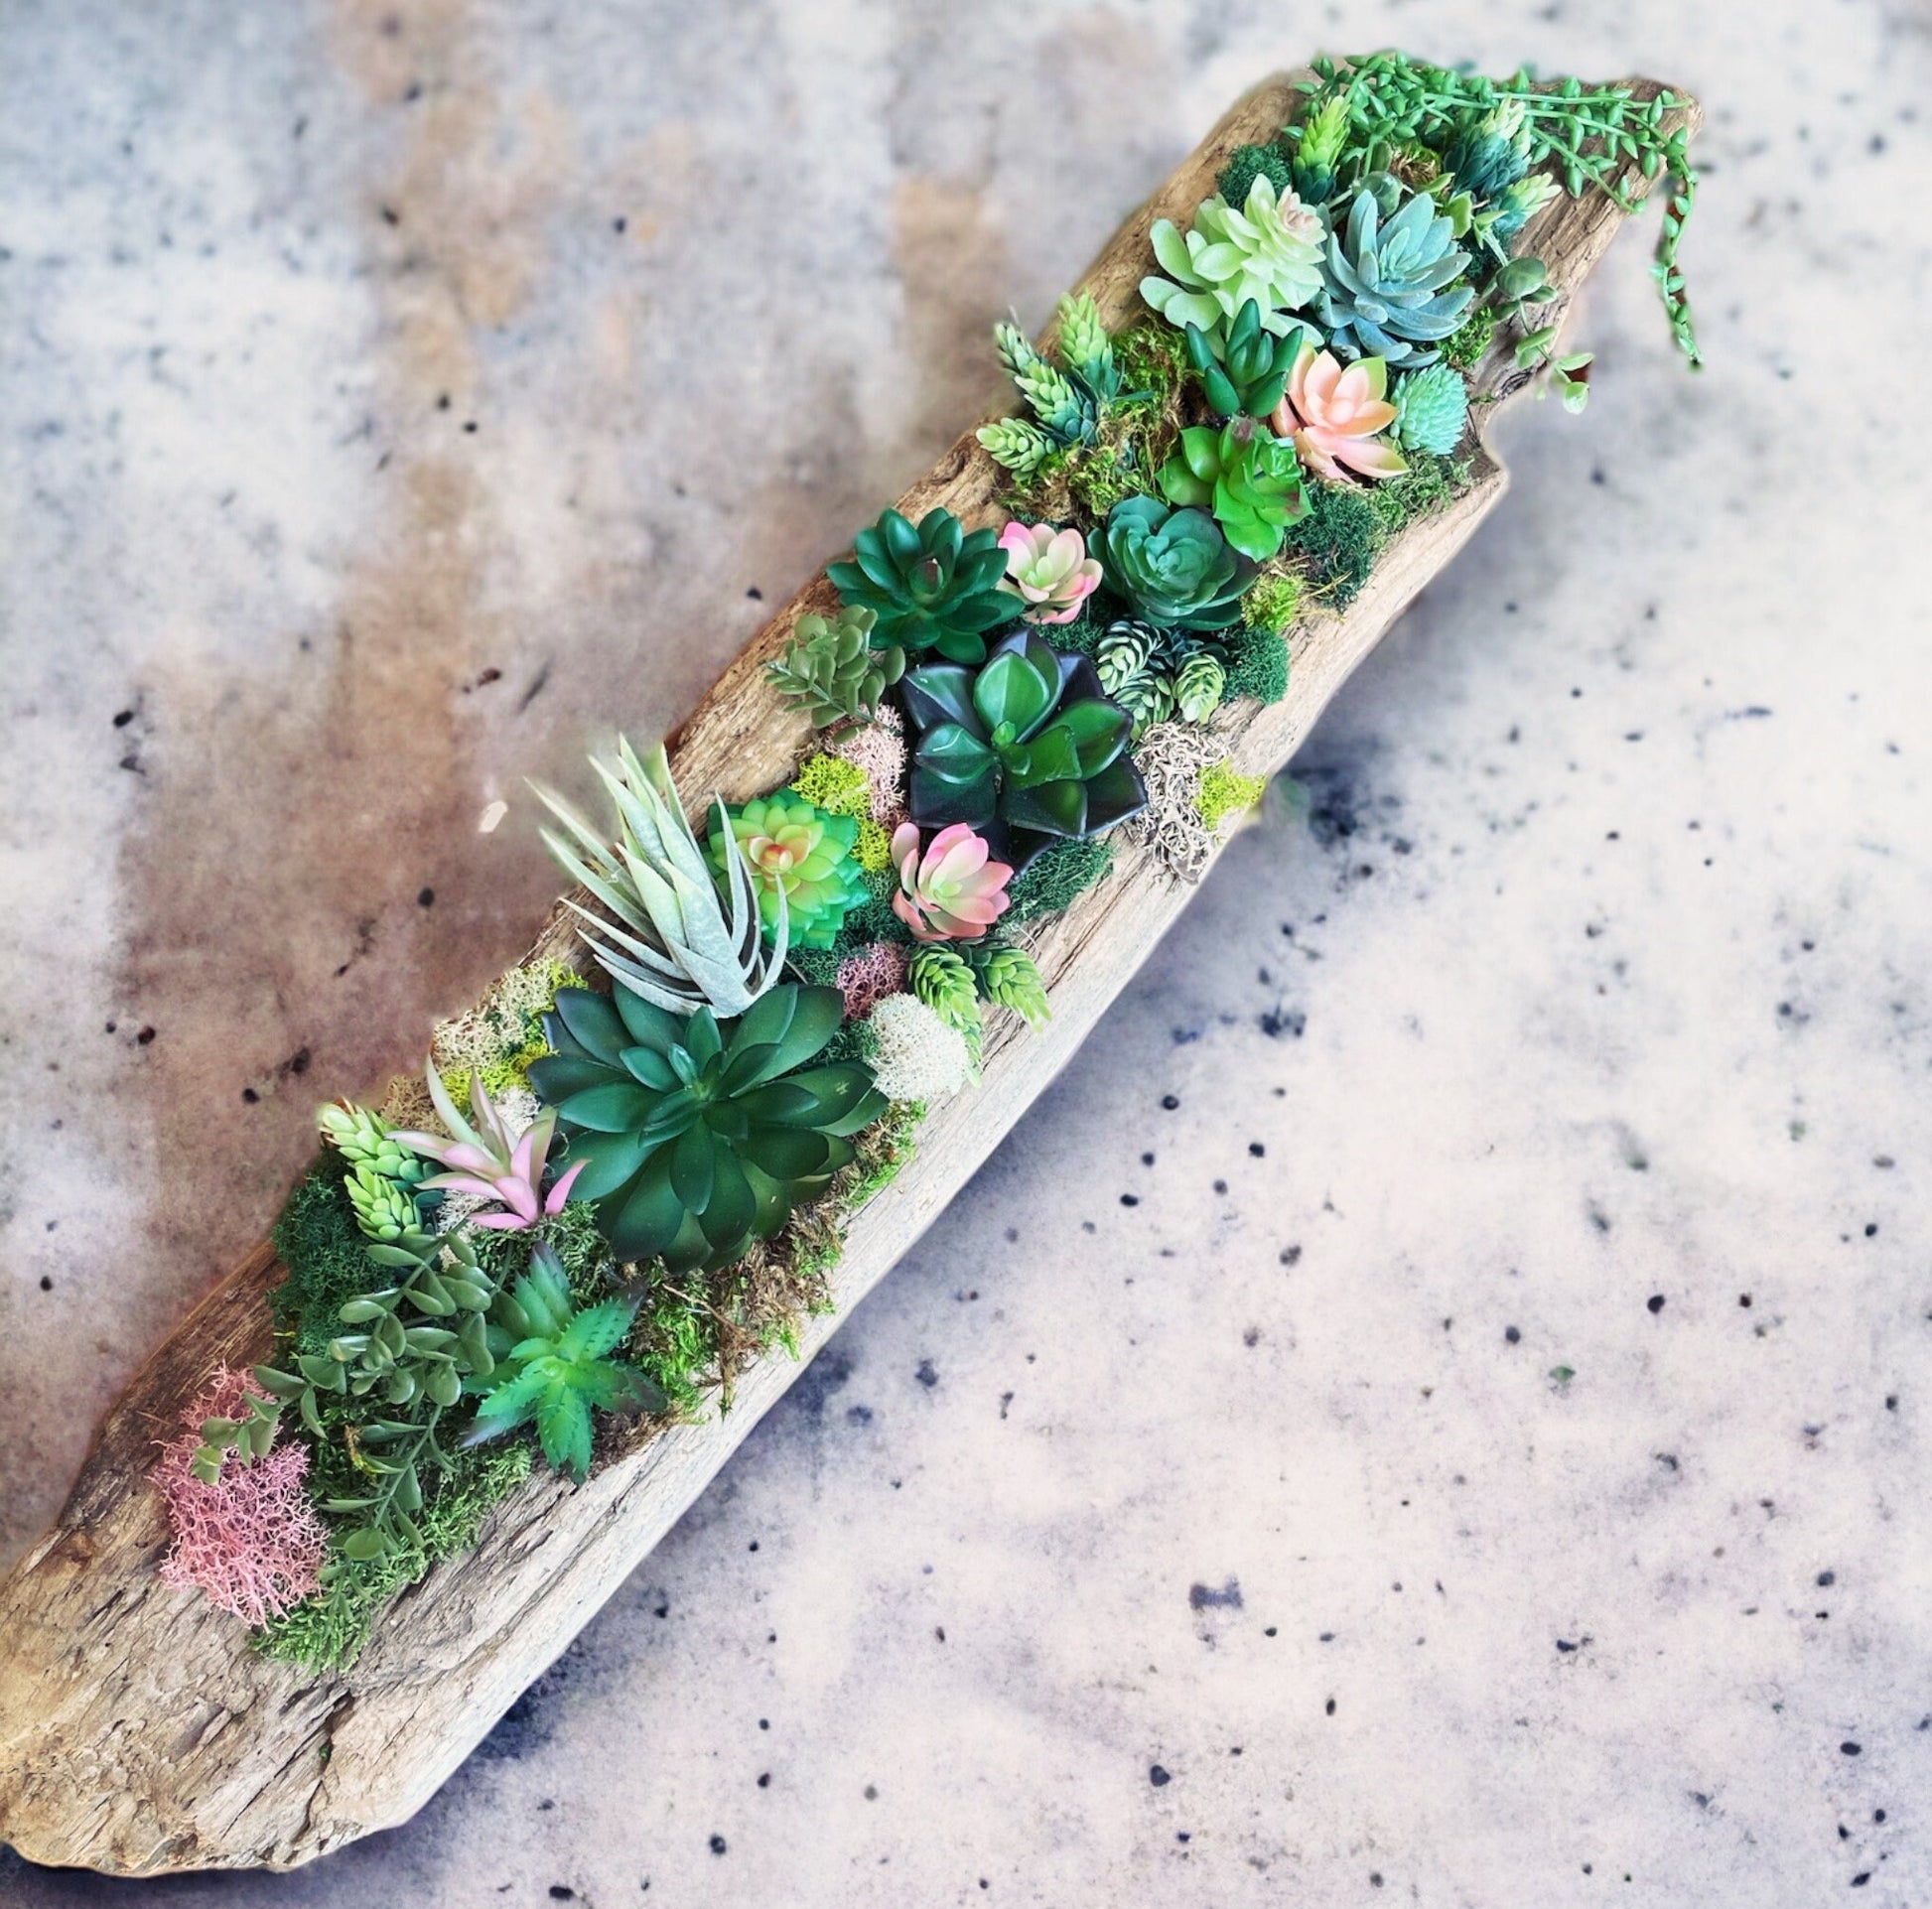 Handmade driftwood centerpiece with faux succulents and moss - rituel